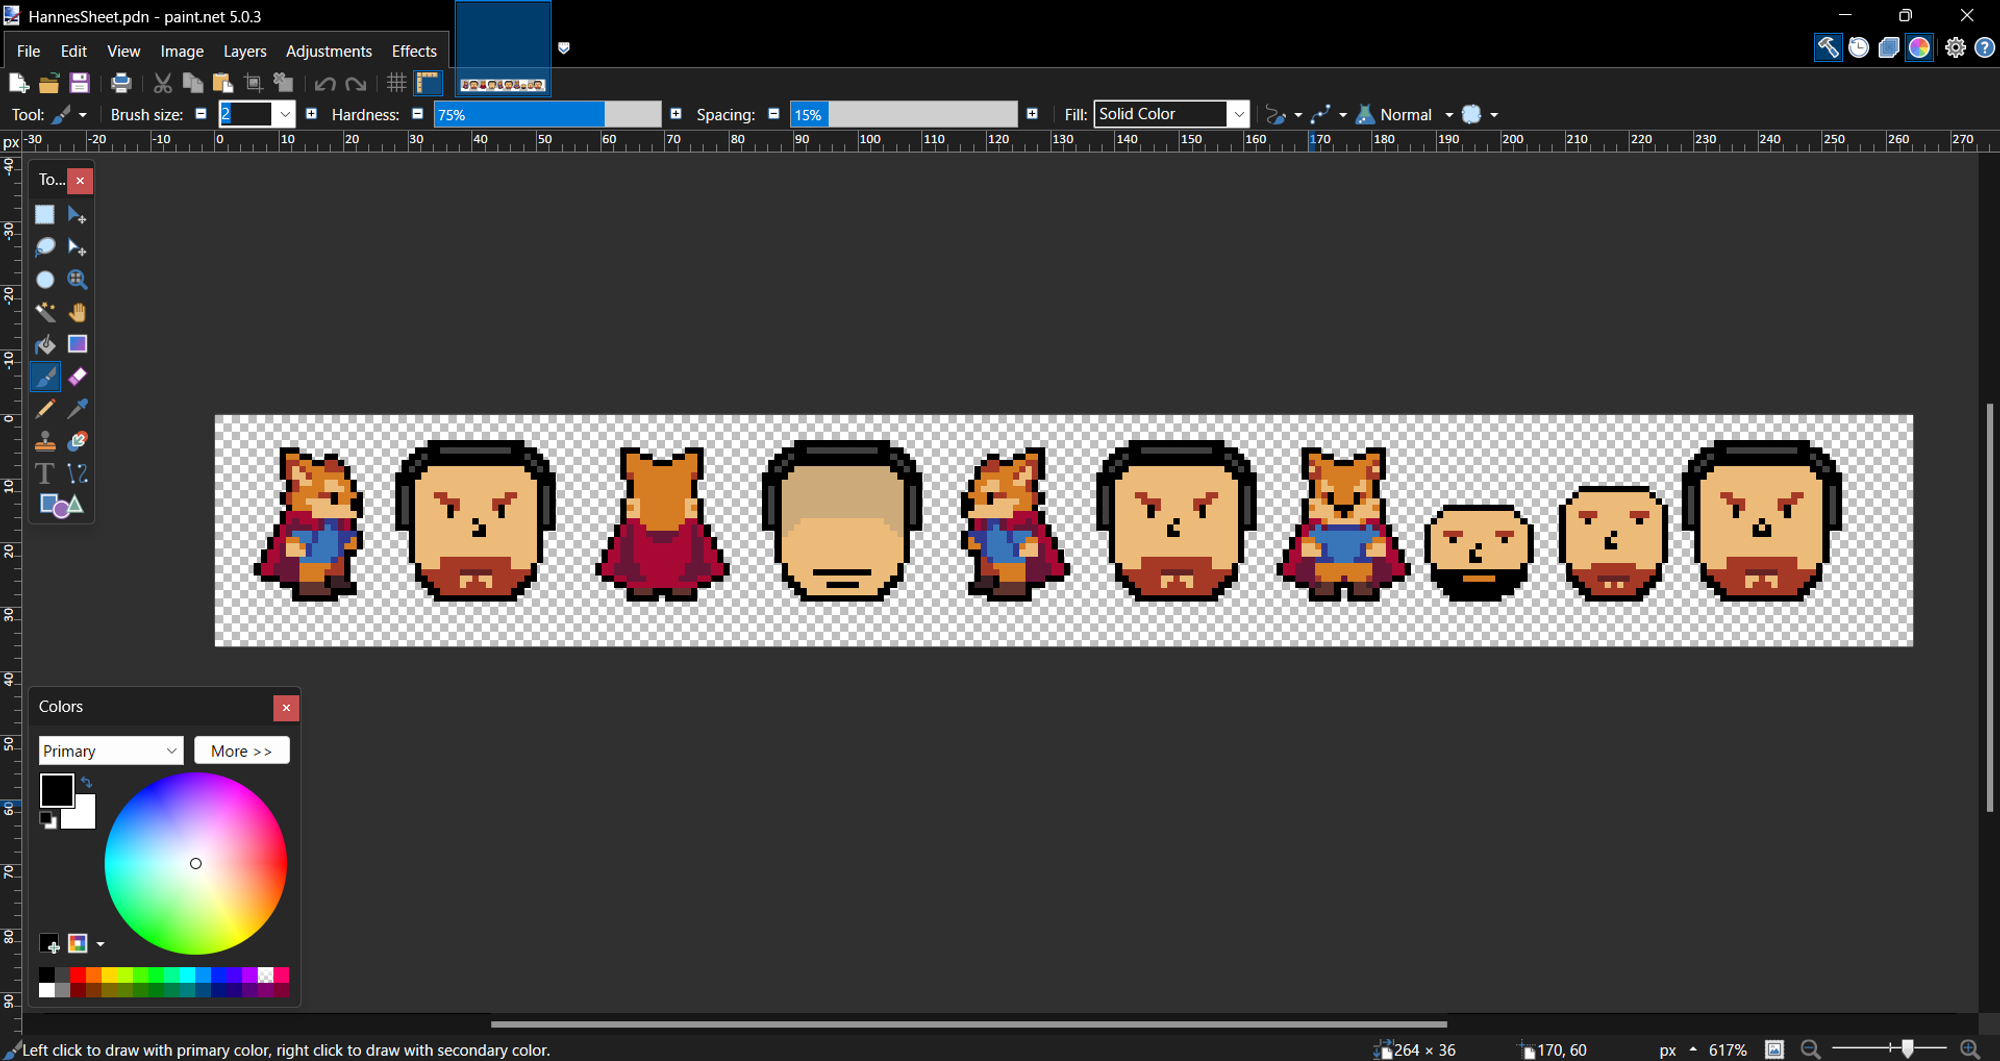 Character sprite sheet in paint.net.